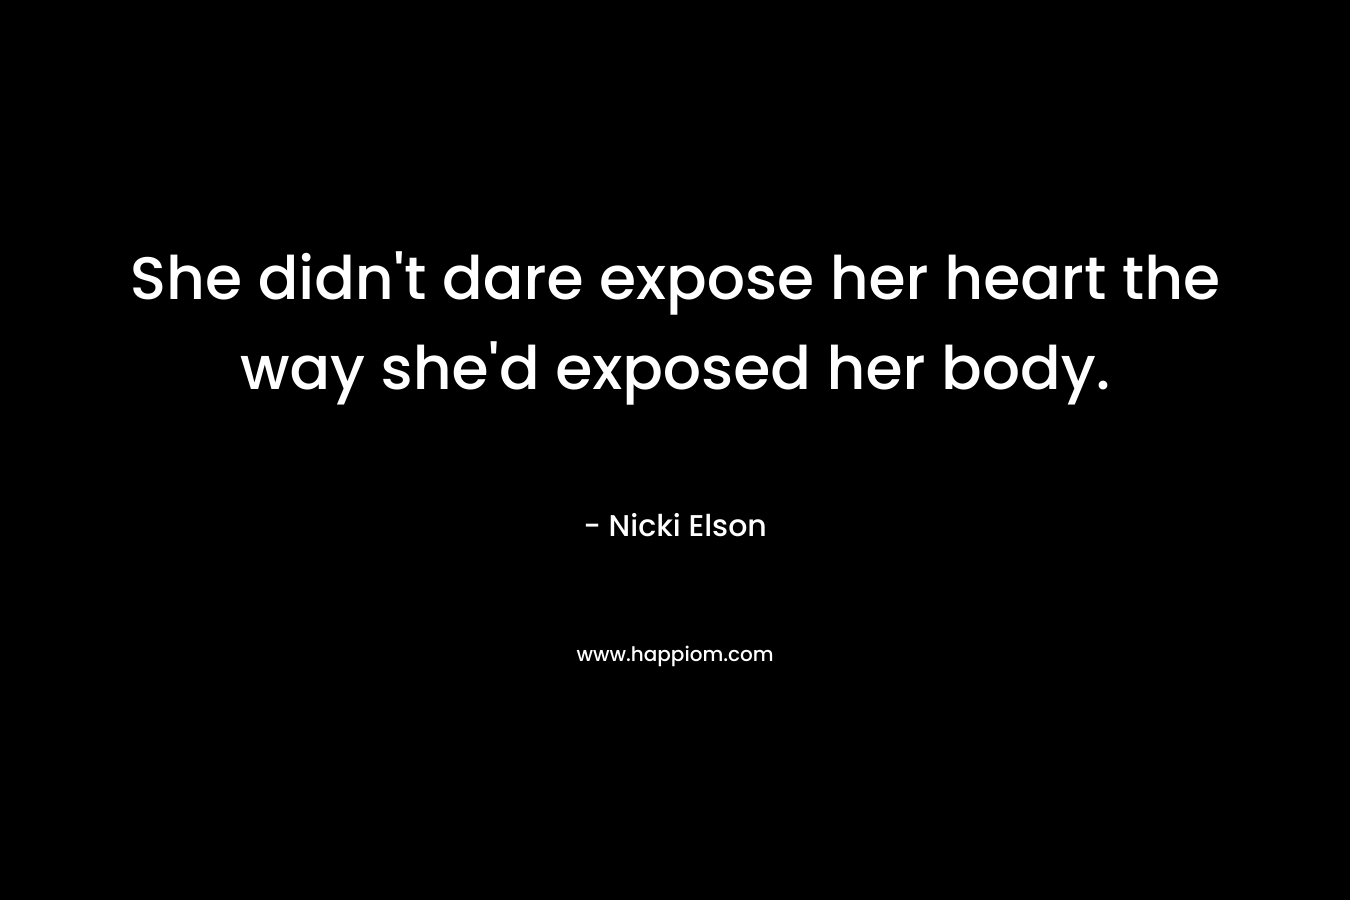 She didn’t dare expose her heart the way she’d exposed her body. – Nicki Elson